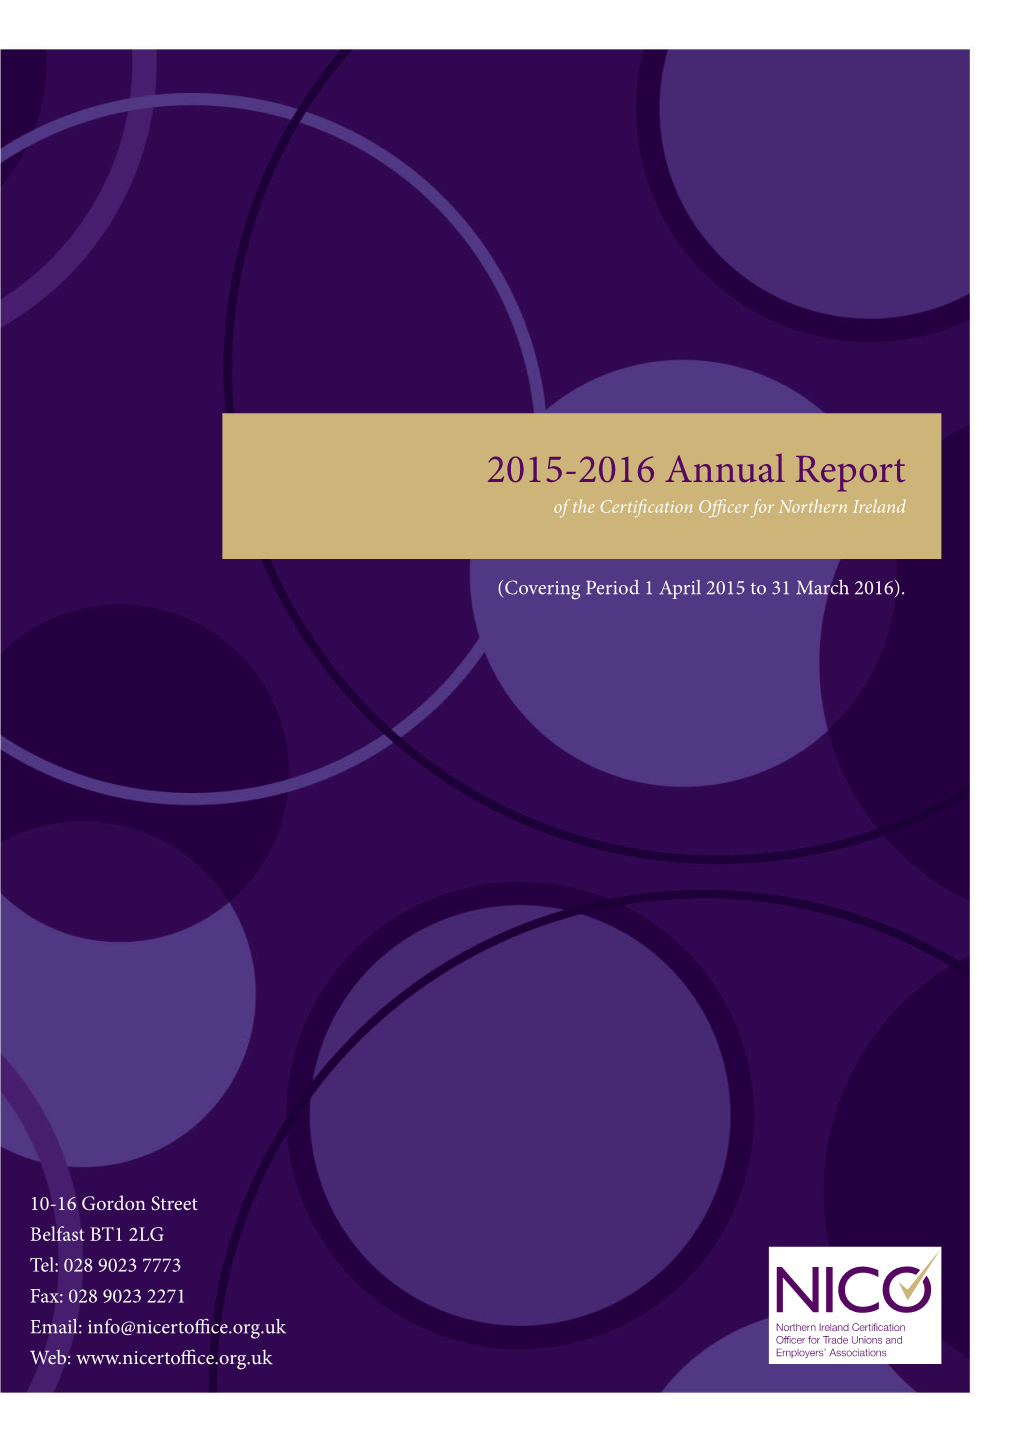 2015-2016 Annual Report of the Certification Officer for Northern Ireland